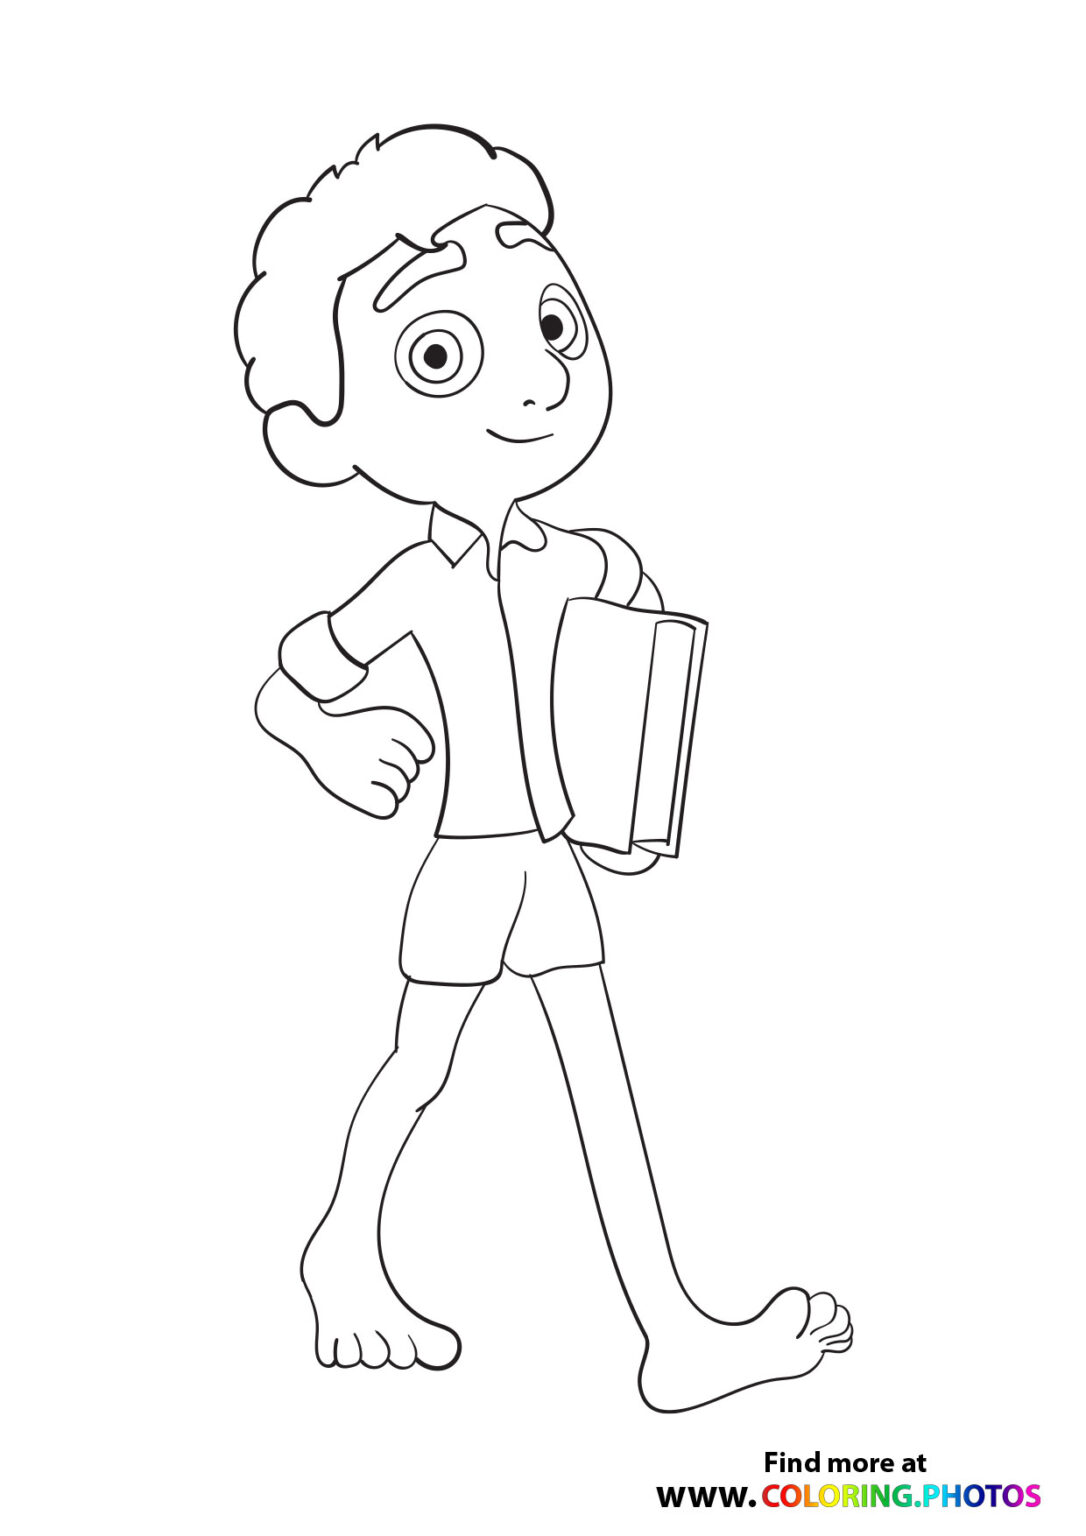 Luca, Alberto and Giulia - Coloring Pages for kids